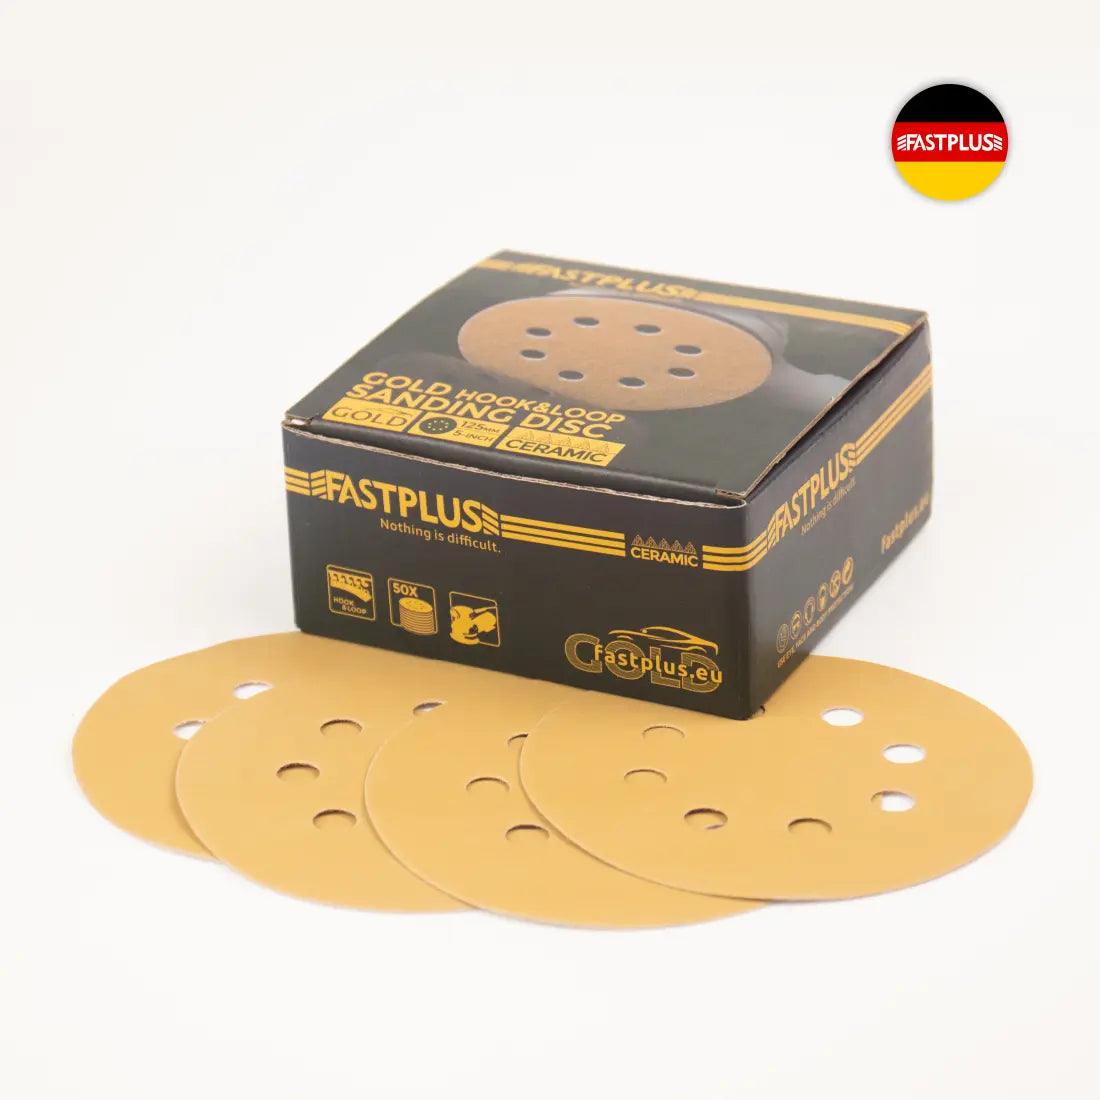 Sanding Discs 125mm Velcro F15 Gold with 8 Holes 